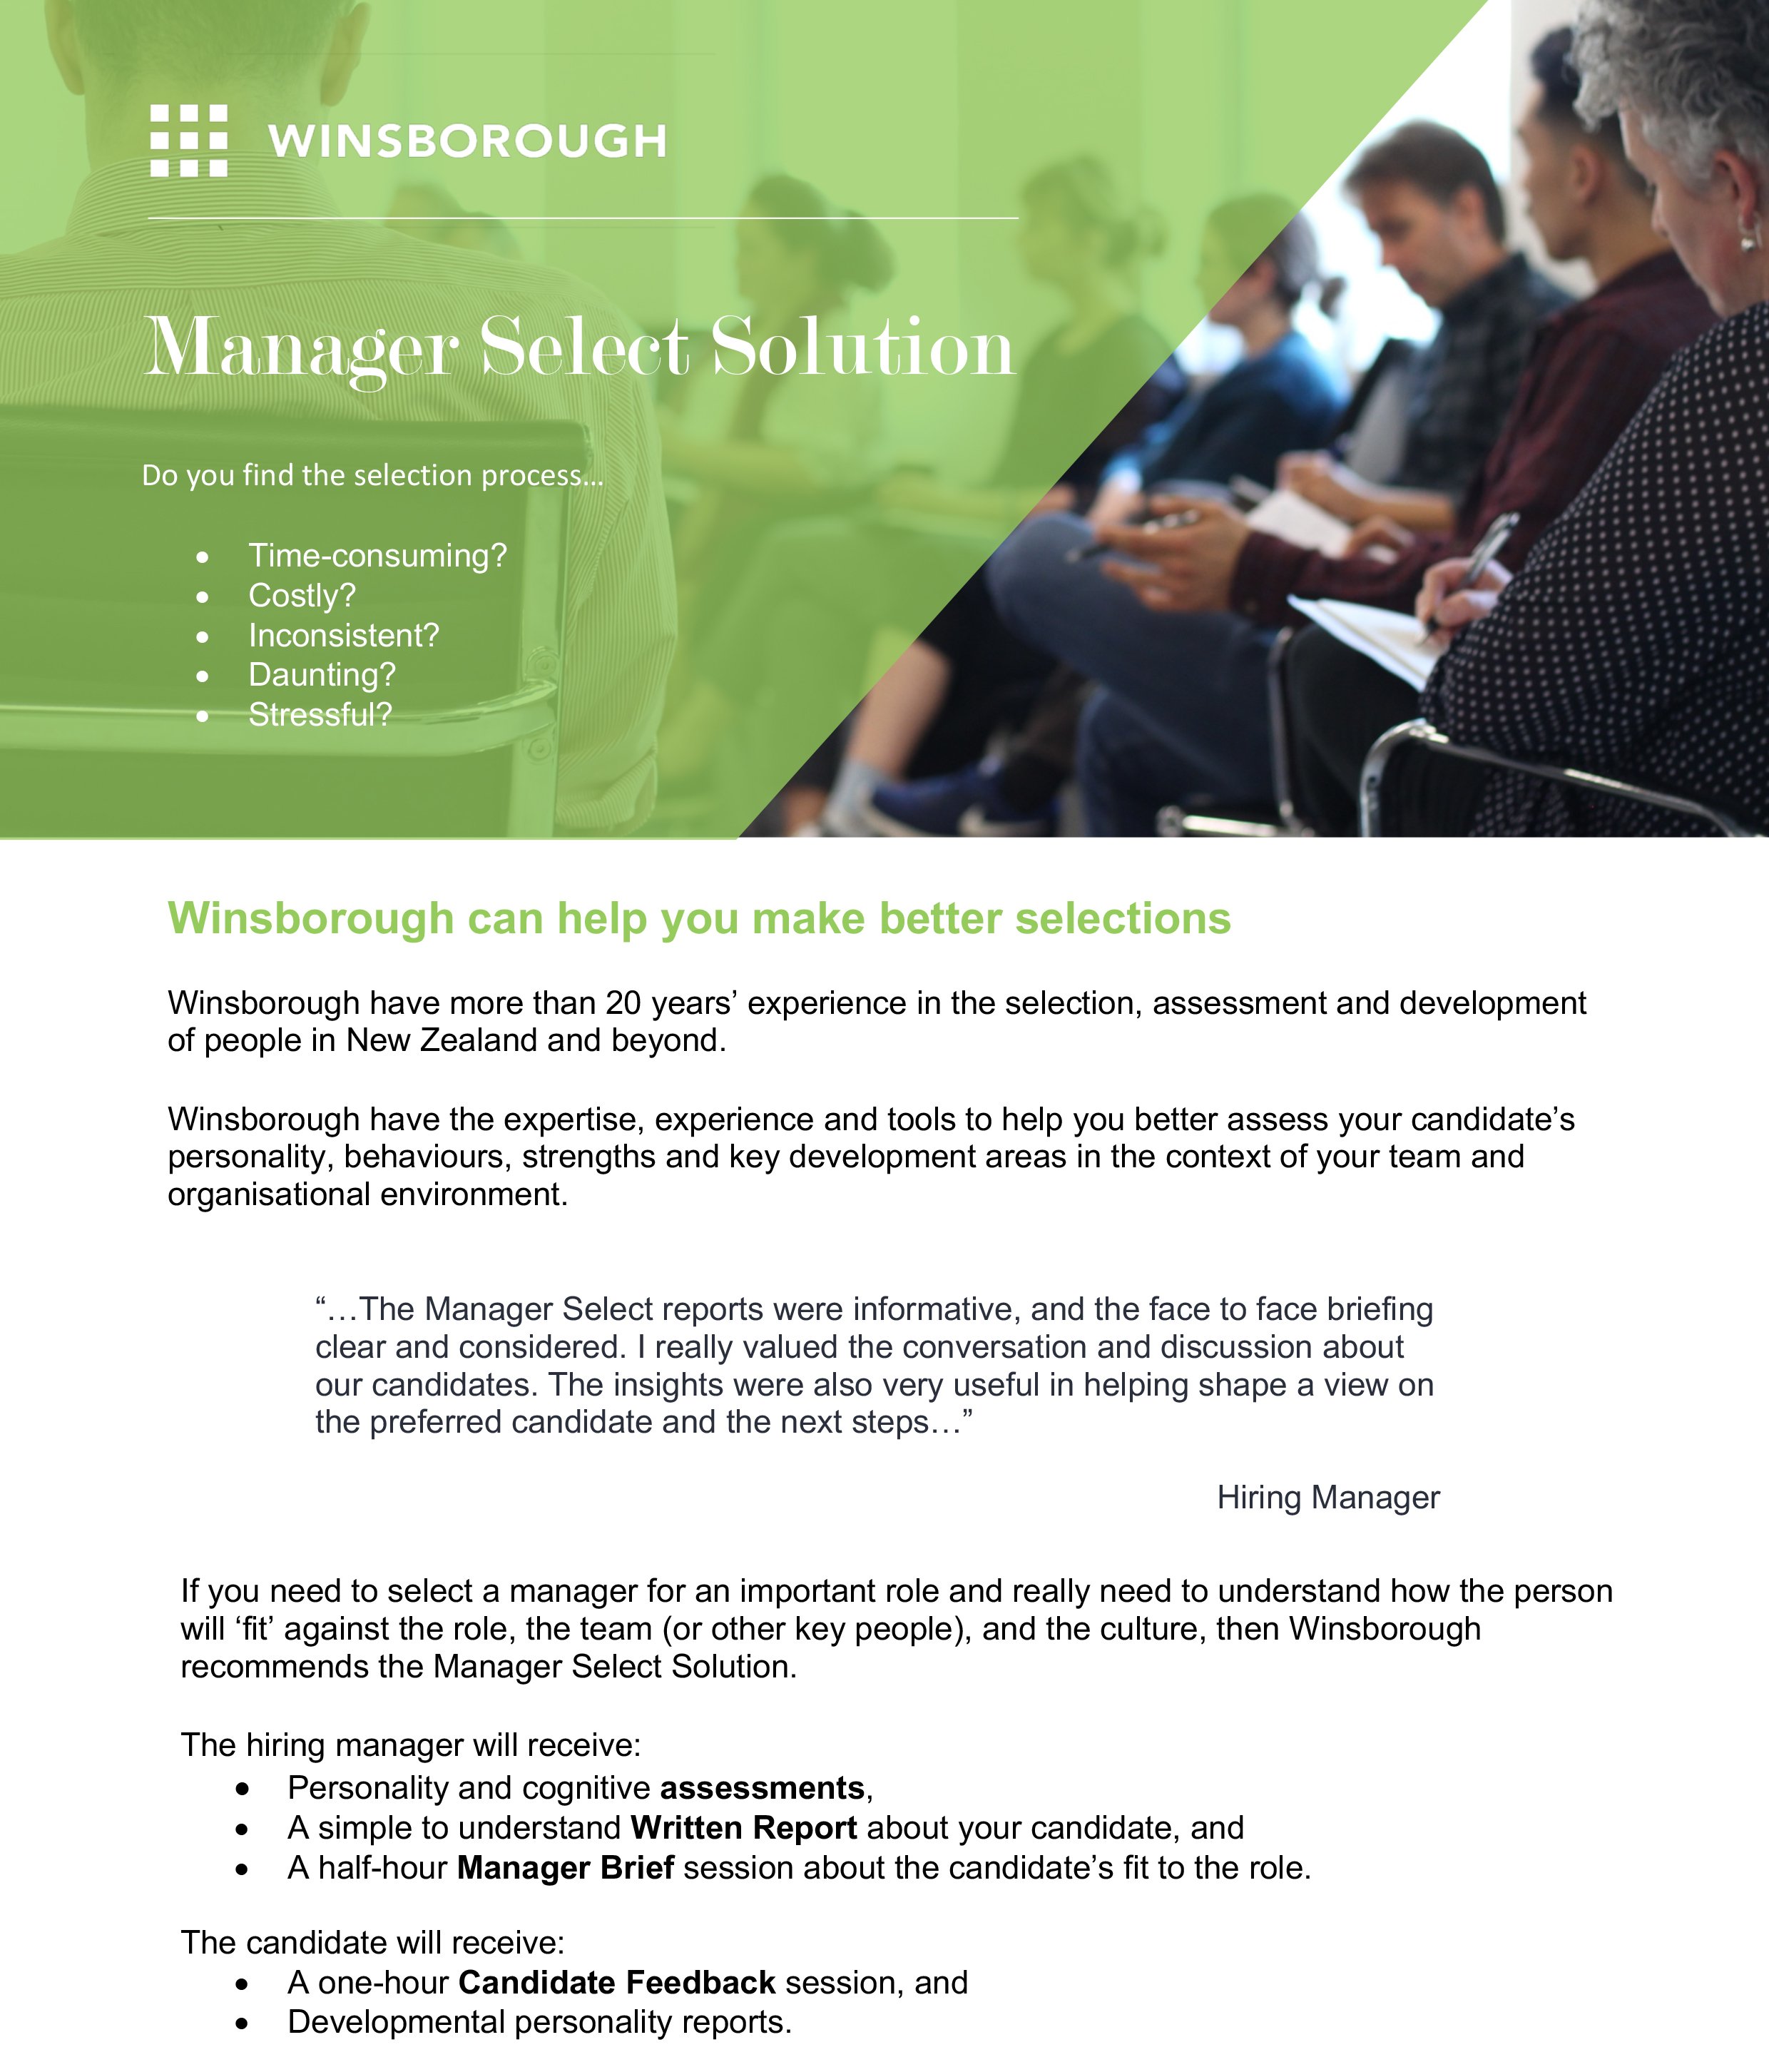 99_Winsborough_NP_OnePageOverview_ManagerSelect_2020_05_07 copy